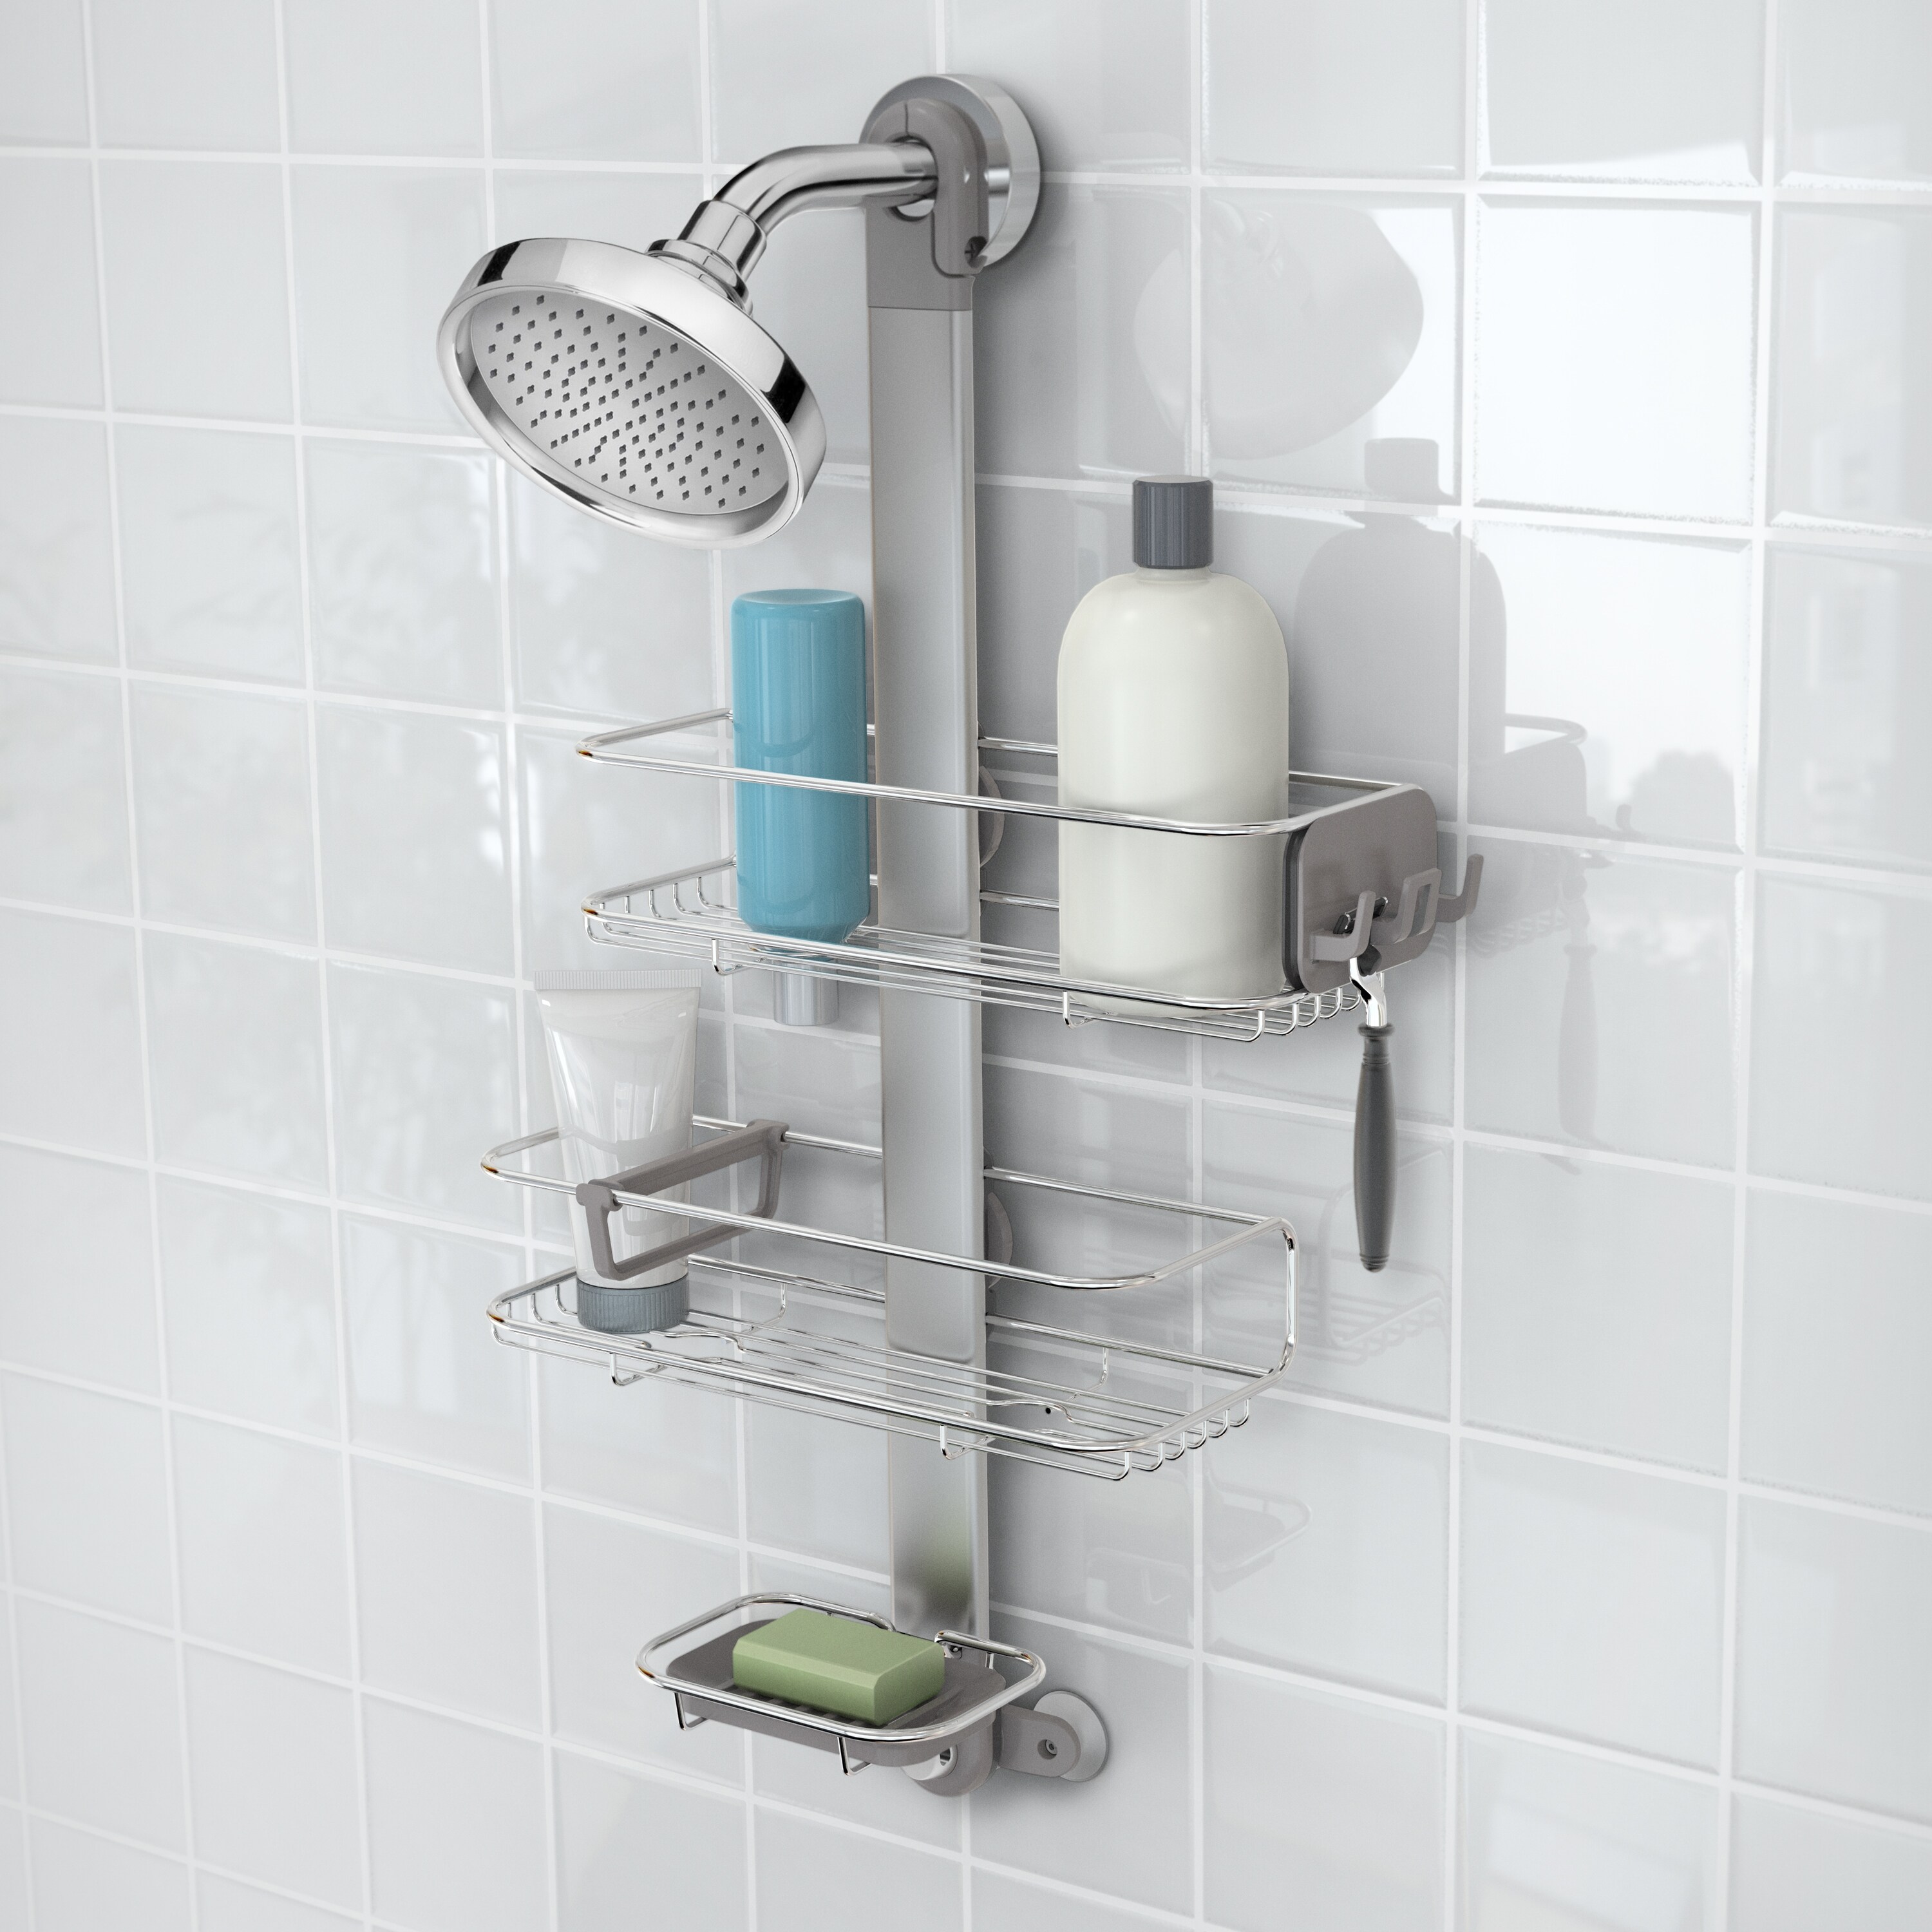 simplehuman Stainless Steel 8 ft. Tension Shower Caddy Organizer